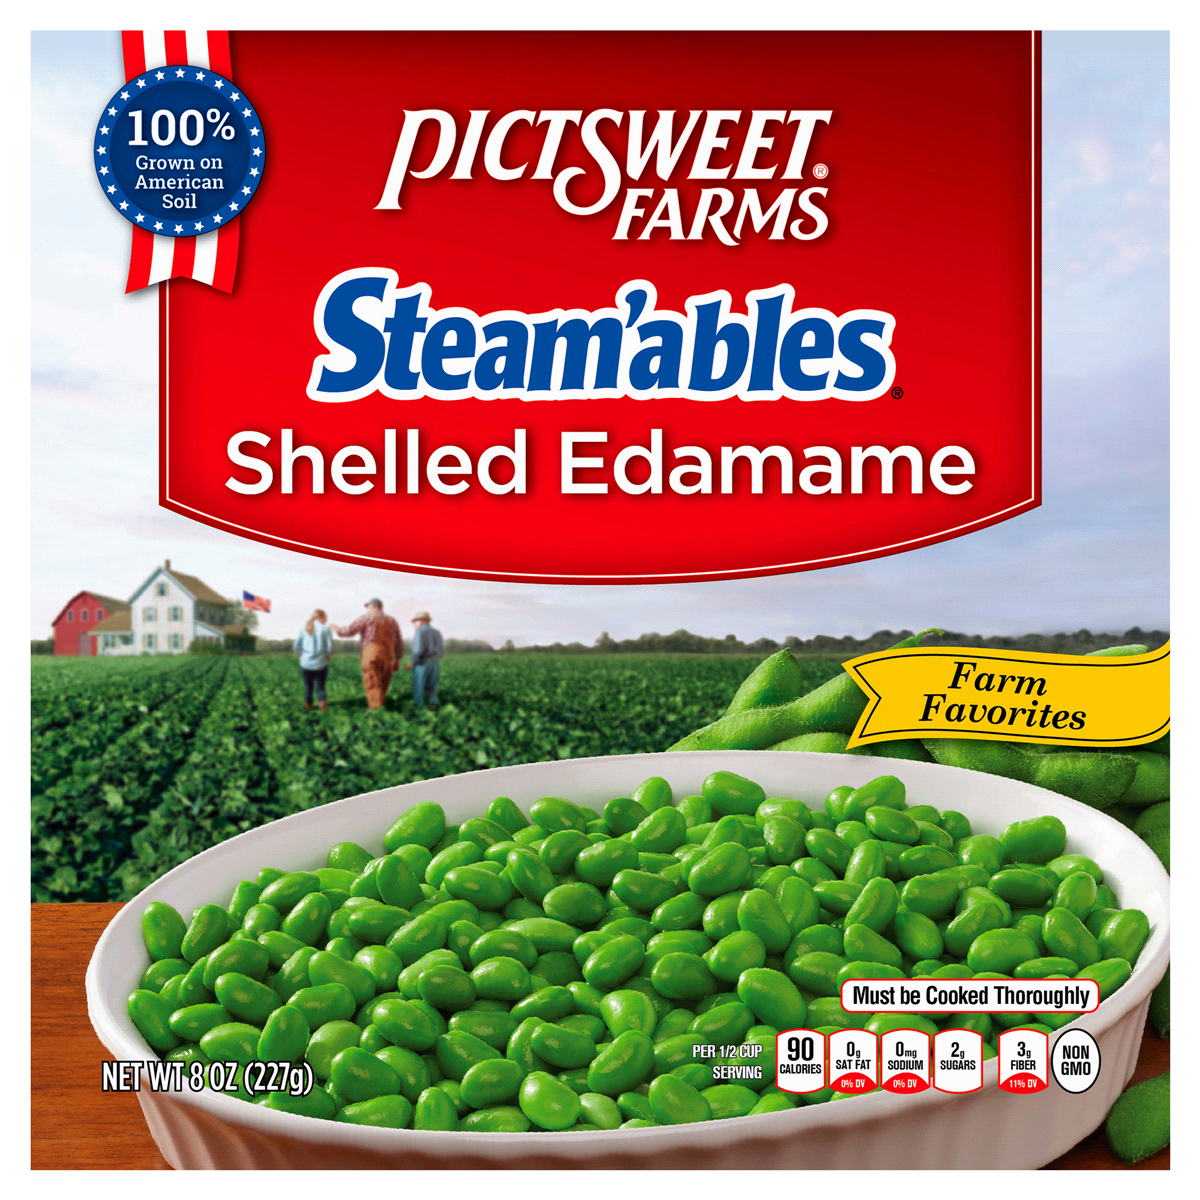 slide 1 of 6, Pictsweet Steamables Edamame Shelled Soybeans, 8 oz